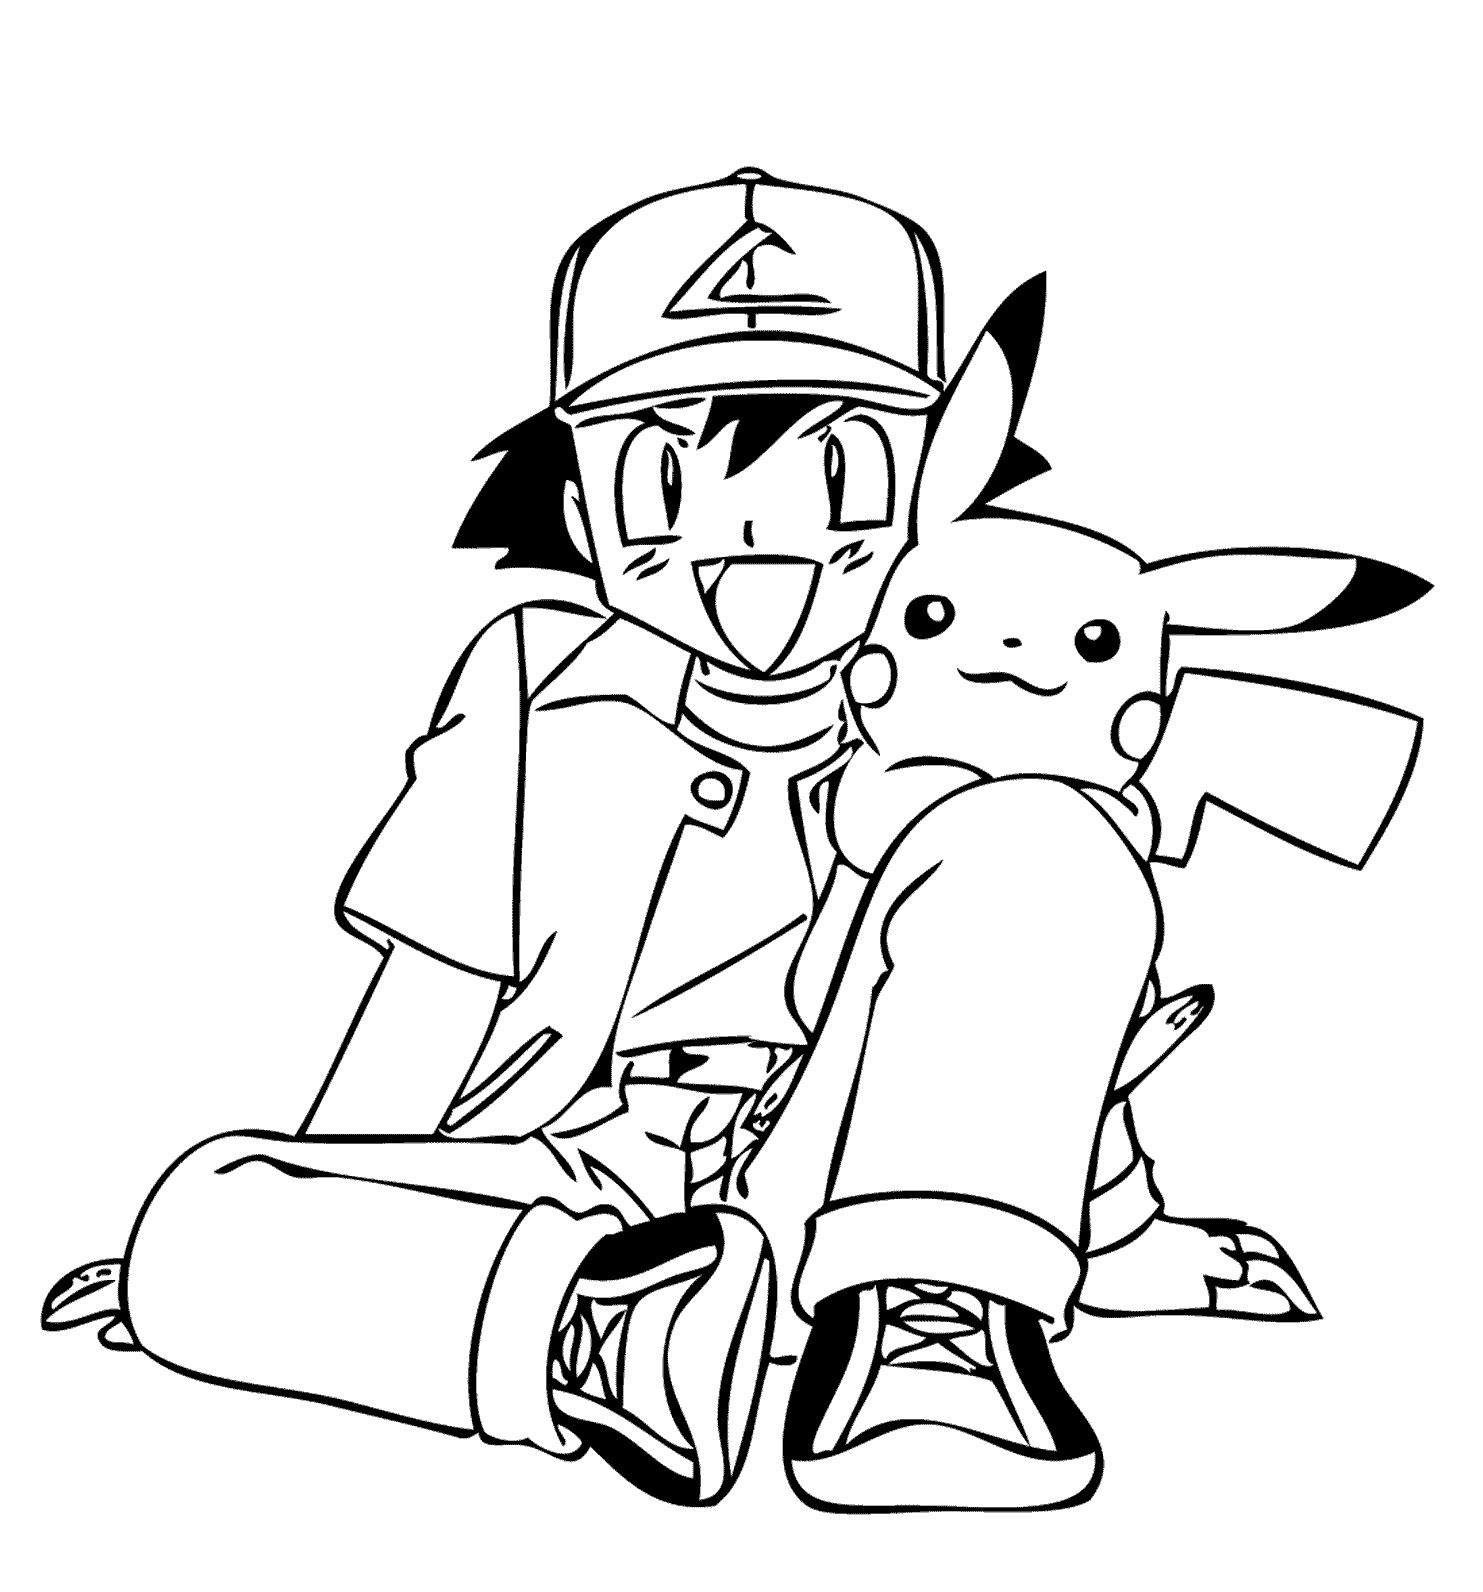 Kids Coloring Pages Pokemon
 Friends from Pokemon anime coloring pages for kids